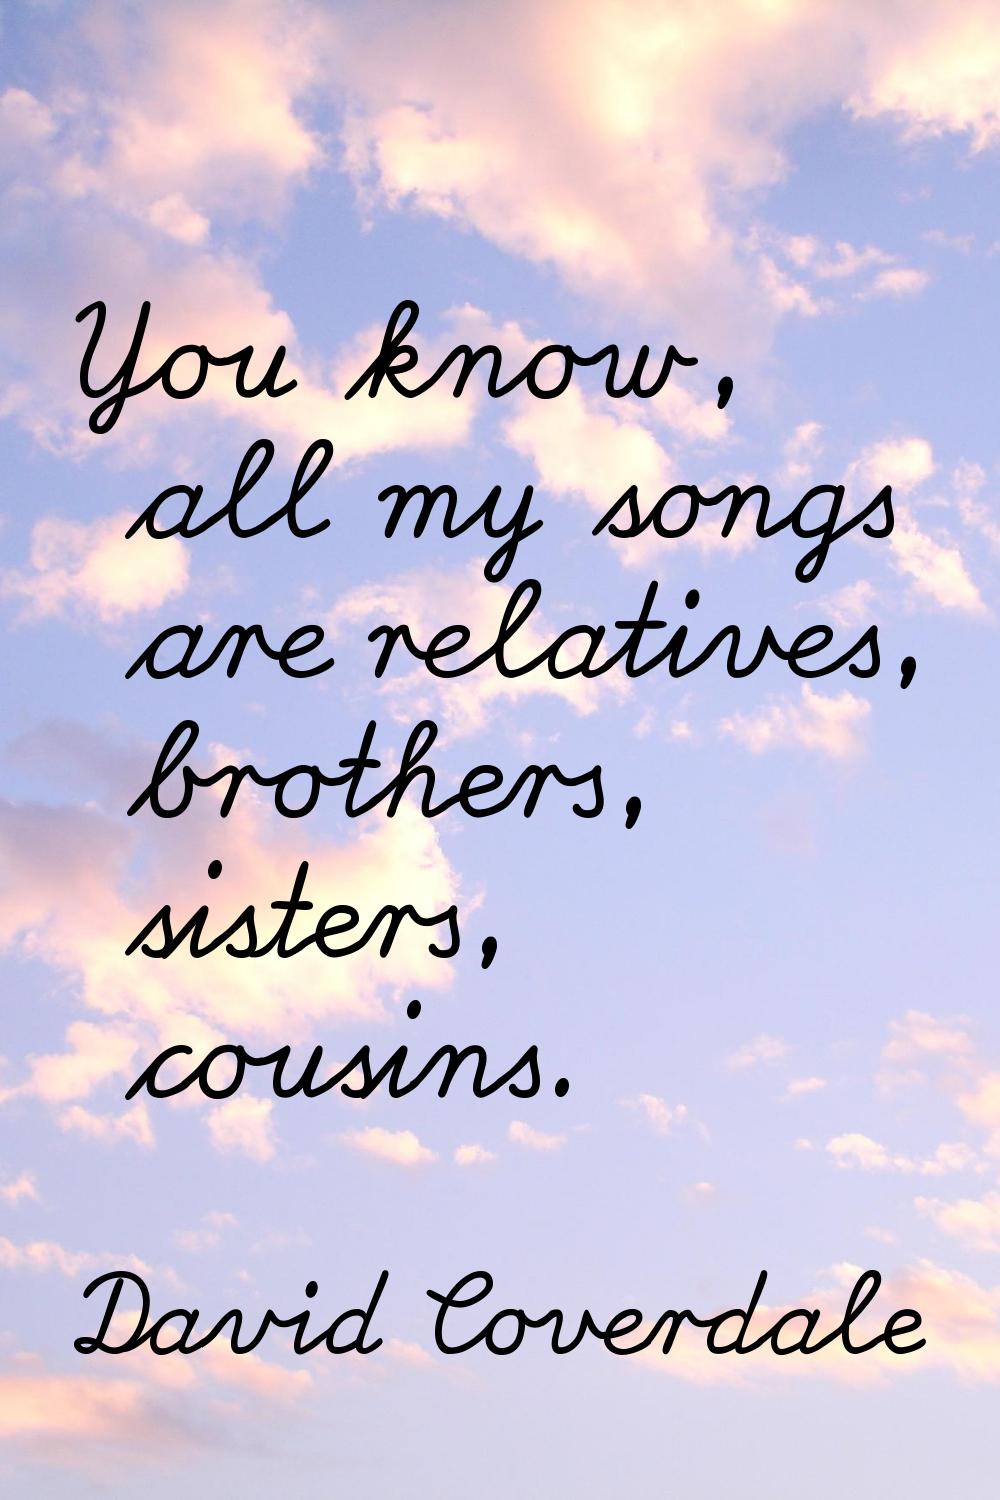 You know, all my songs are relatives, brothers, sisters, cousins.